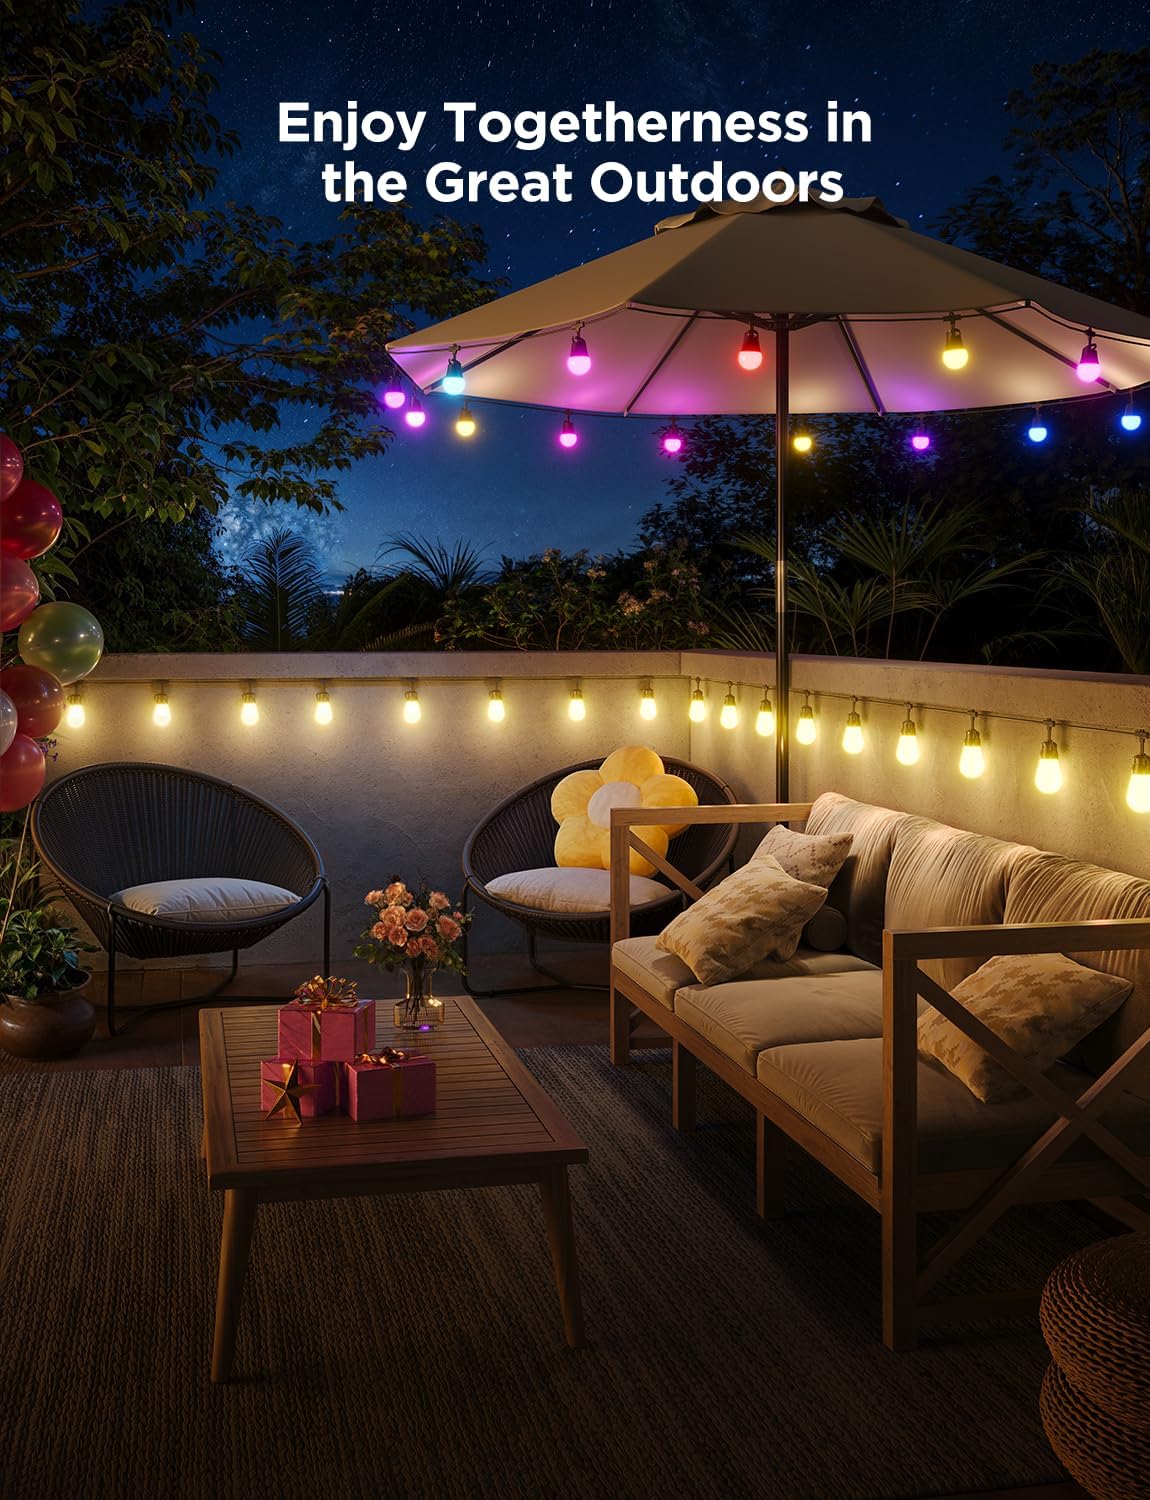 Govee Outdoor String Lights